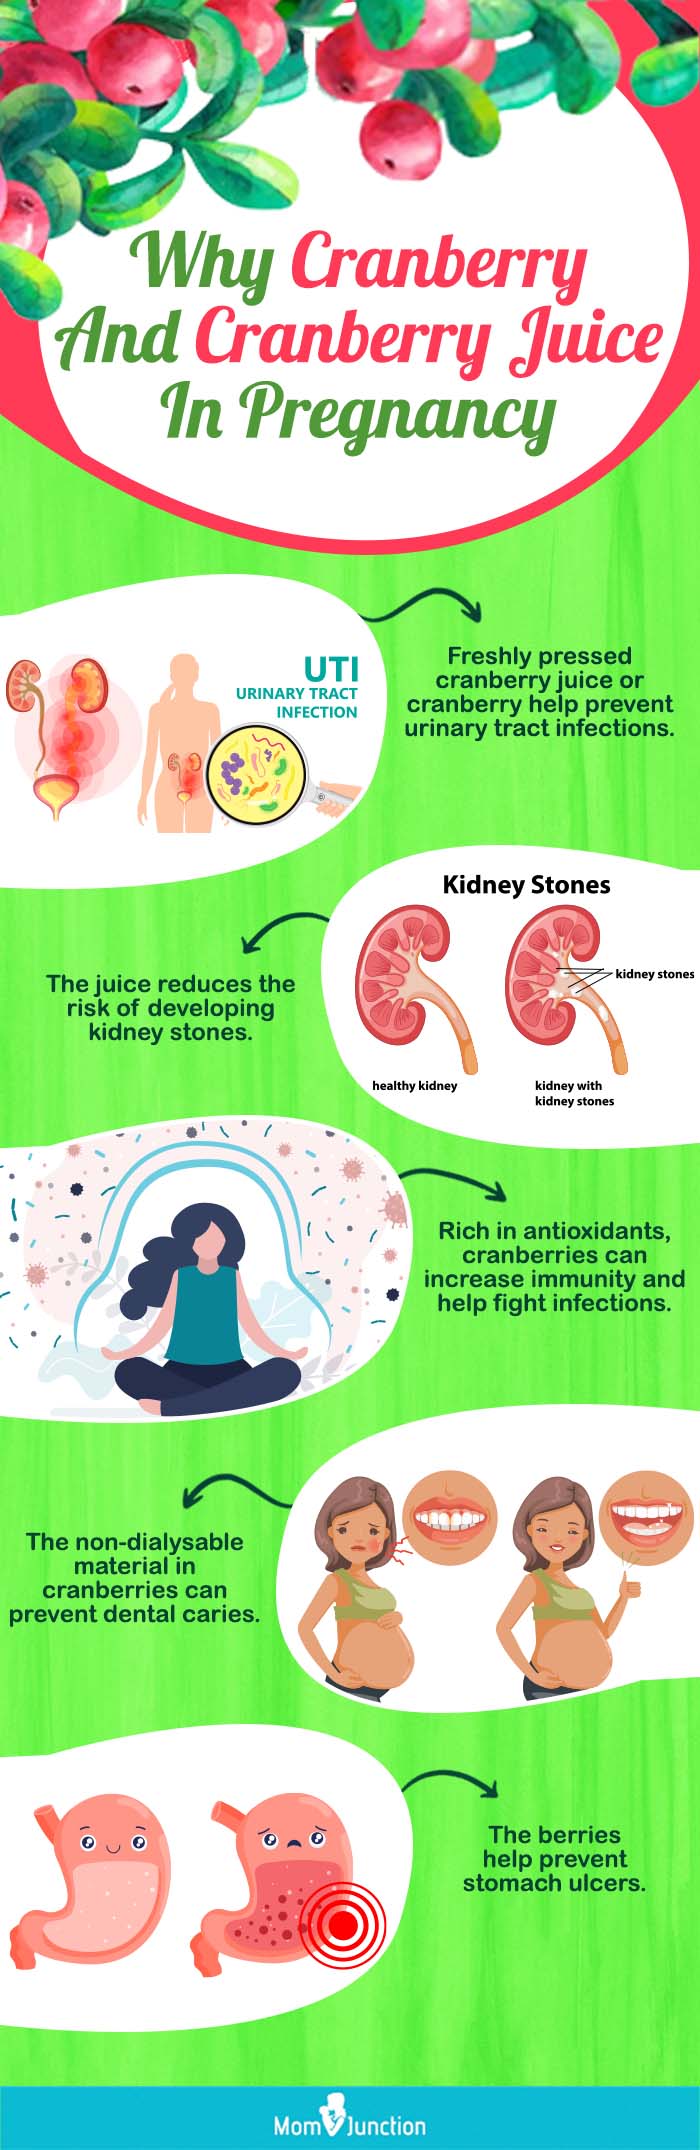 why cranberry and cranberry juice in pregnancy (infographic)